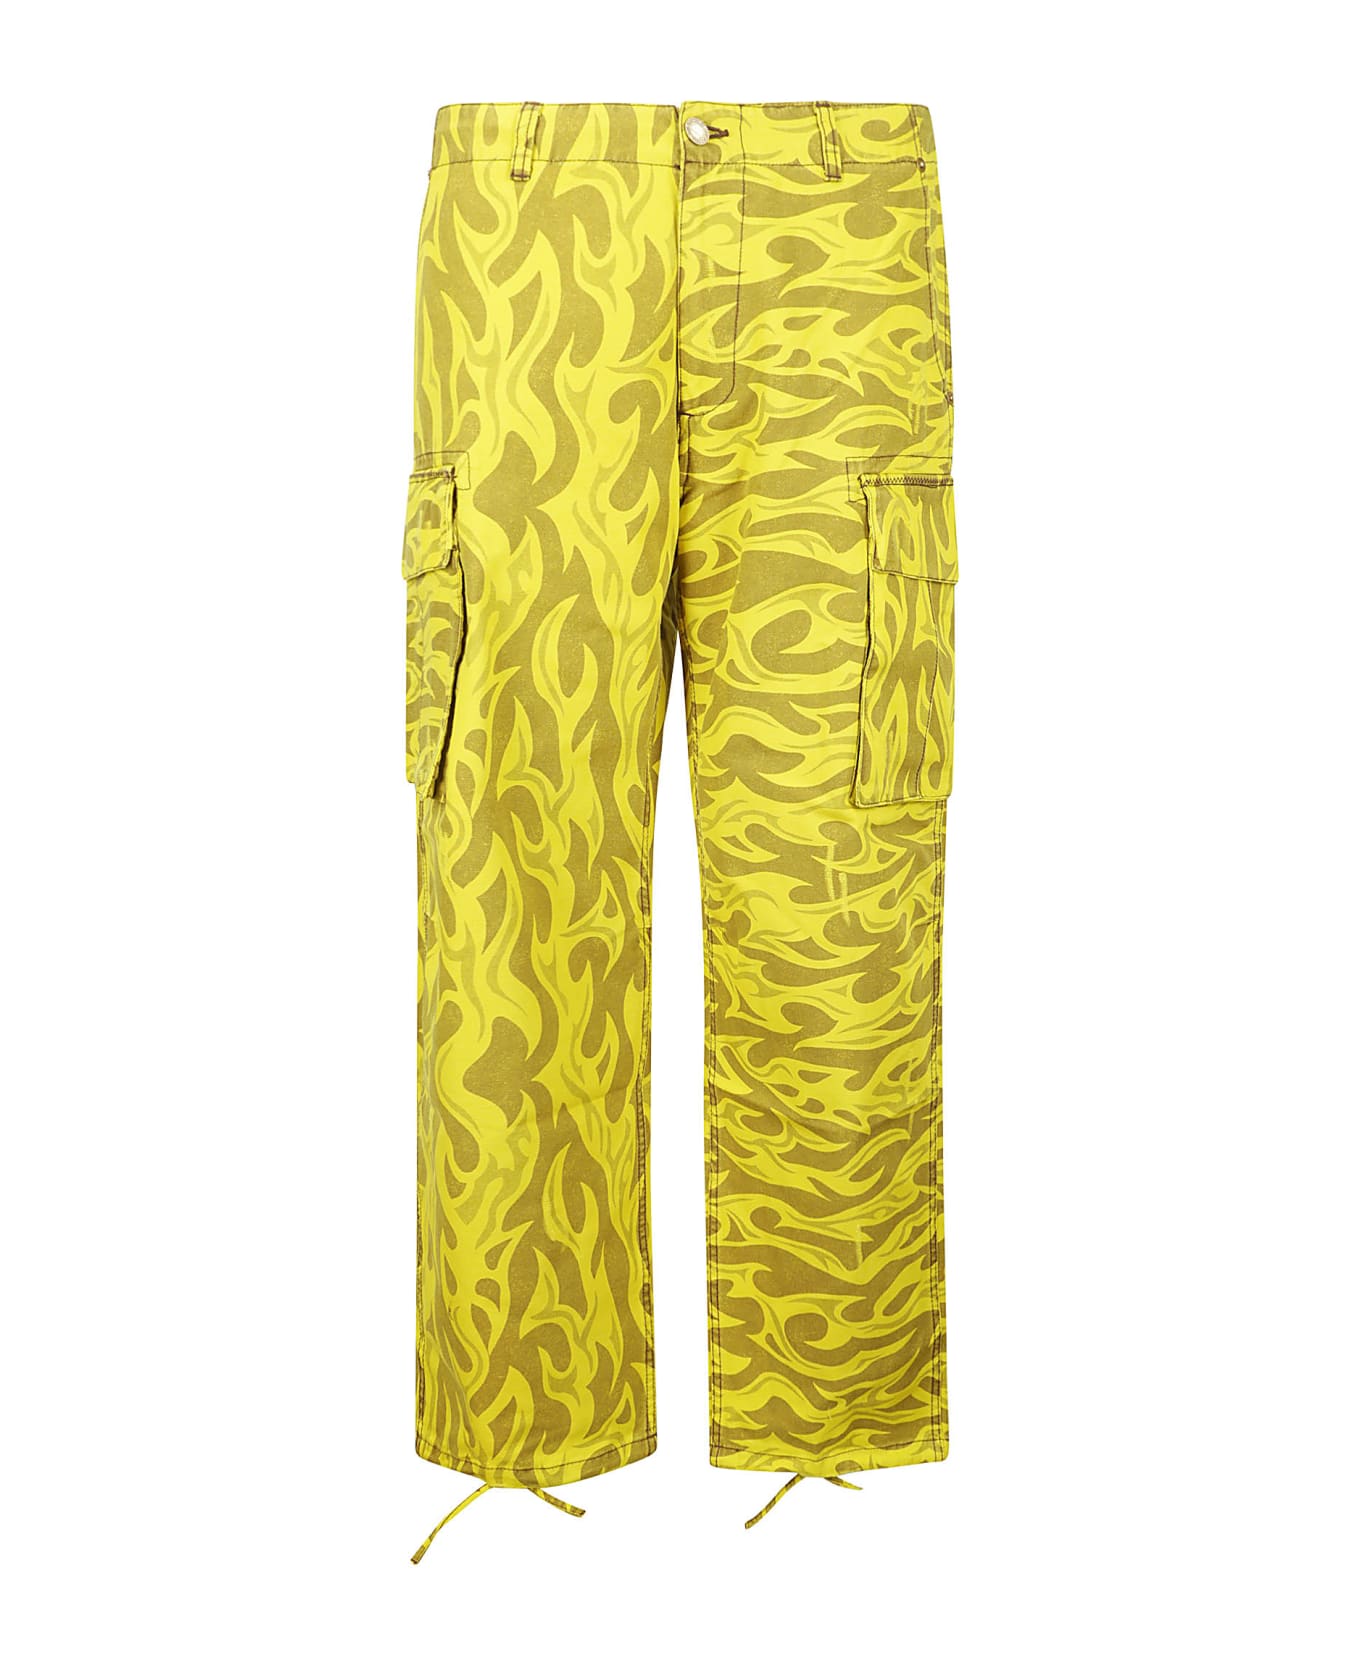 ERL Unisex Printed Cargo Pants Woven - YELLOW FLAME ボトムス